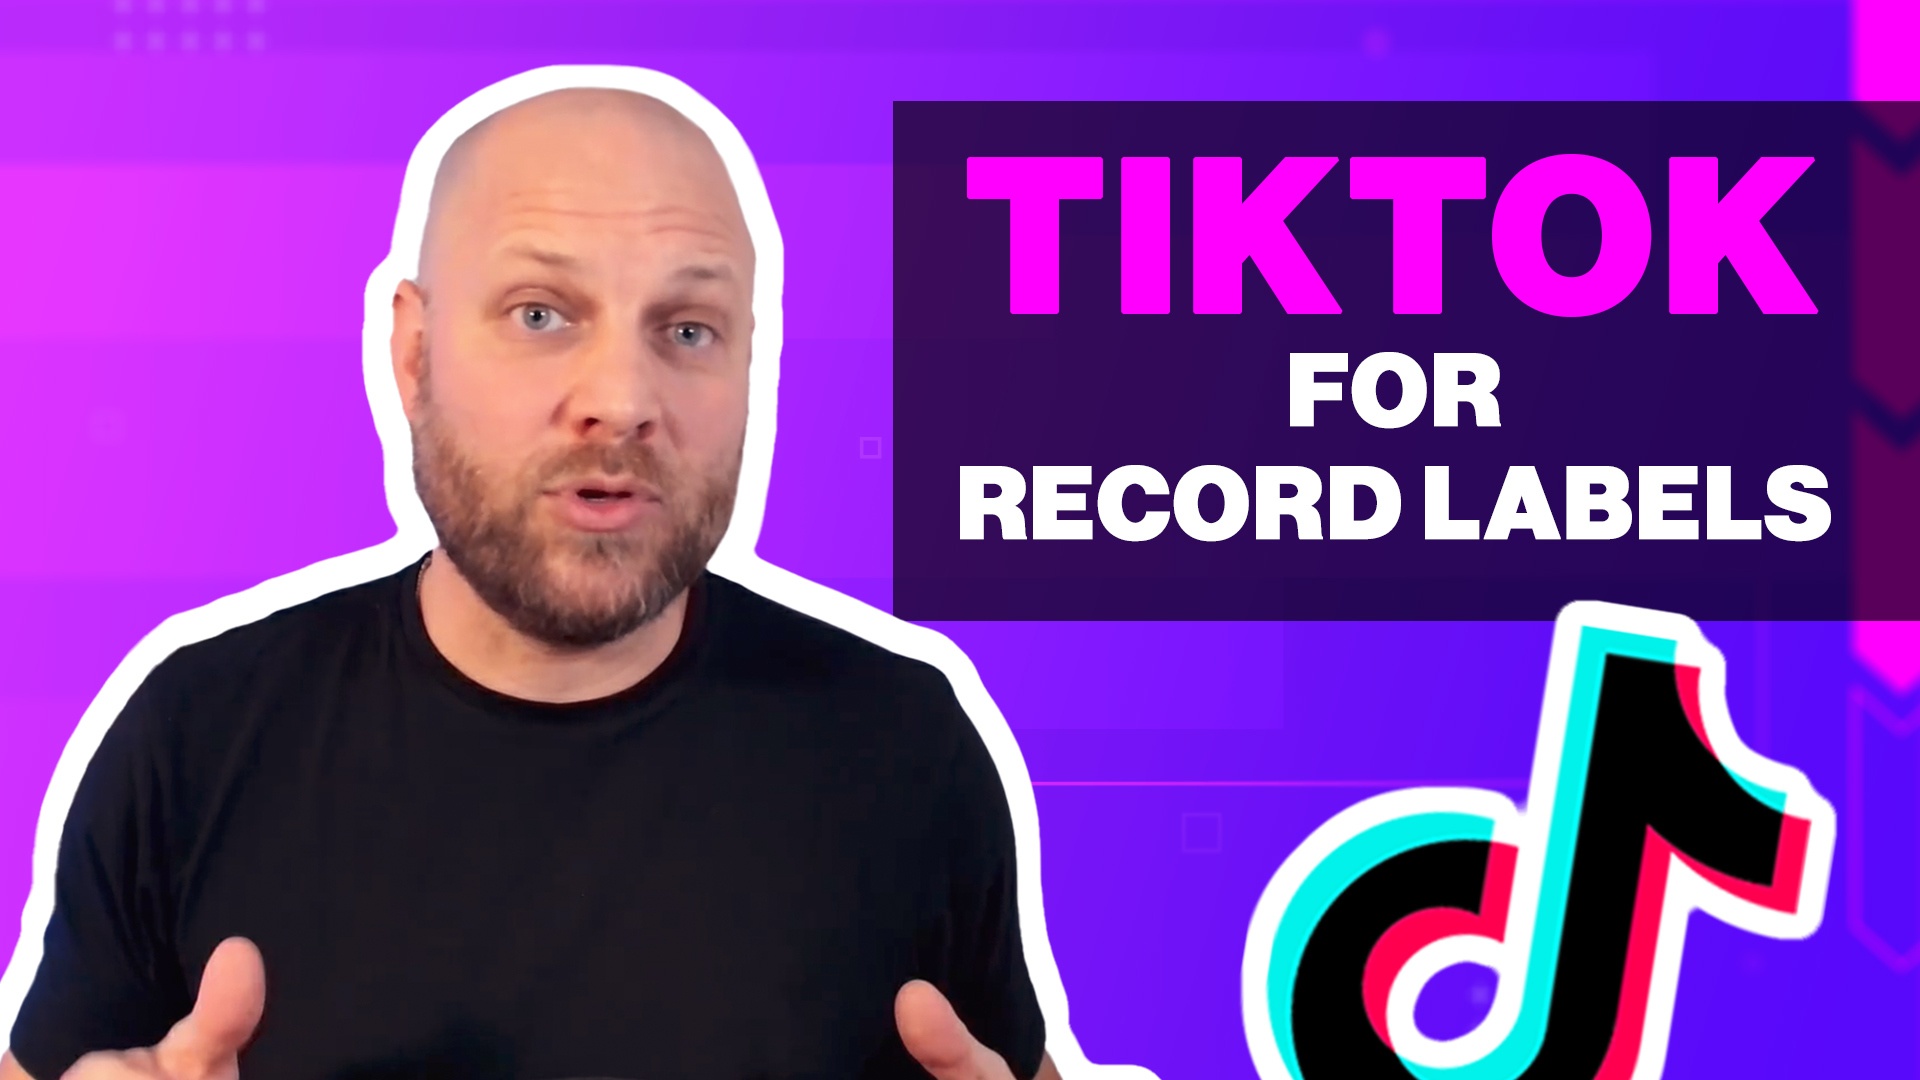 How to Use TikTok to Promote Music for Record Labels and Artists